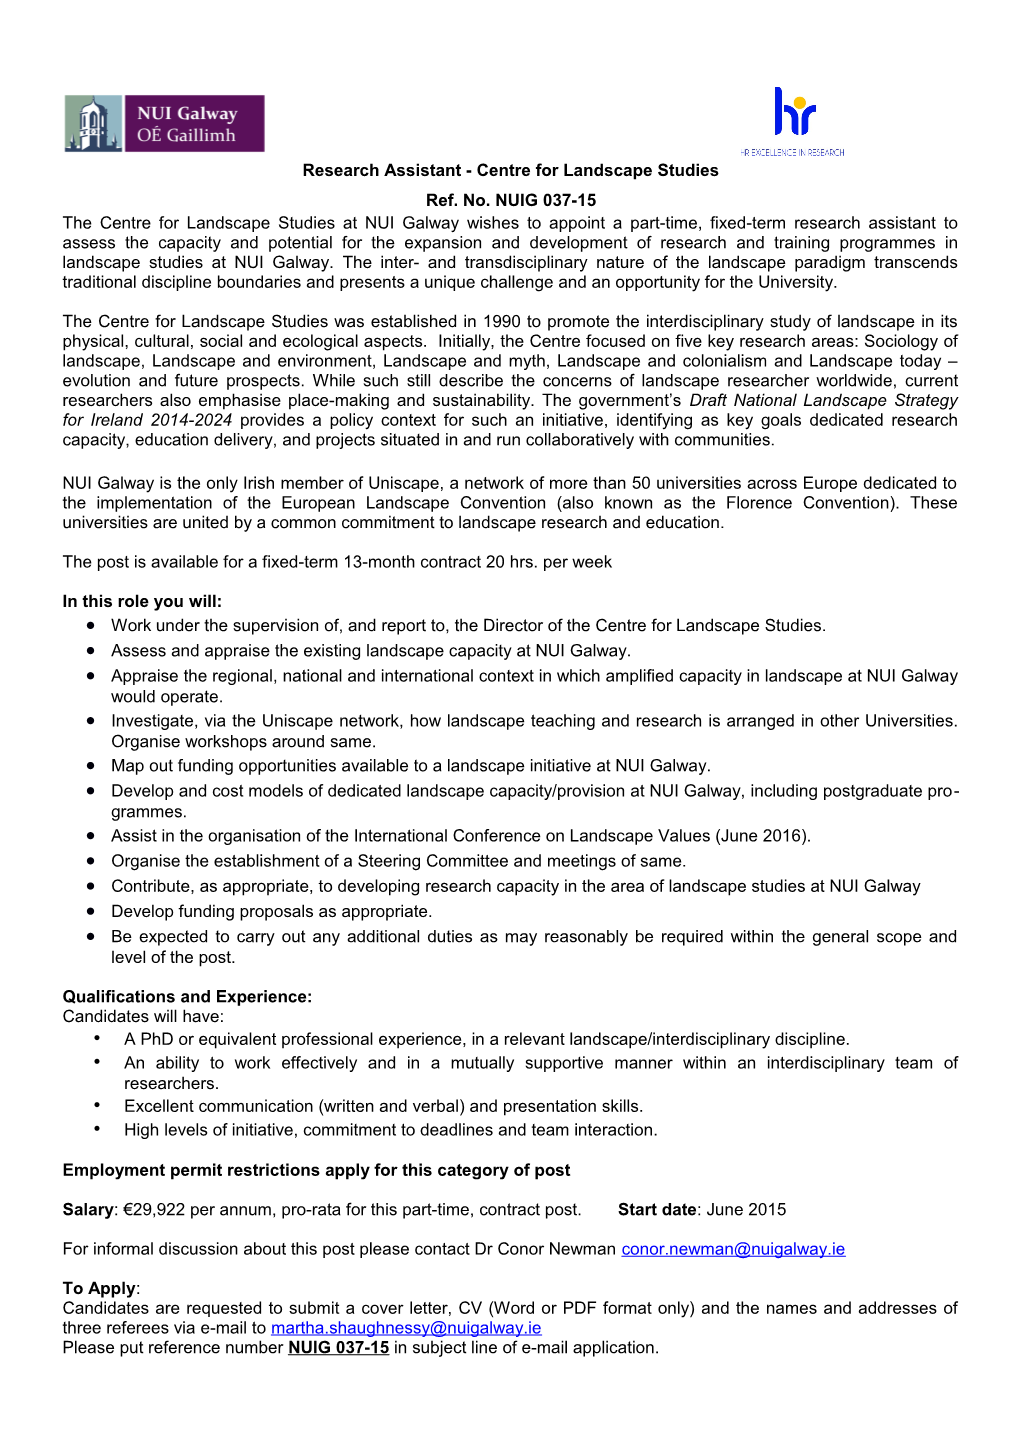 Research Associate at the Irish Centre for Social Gerontology